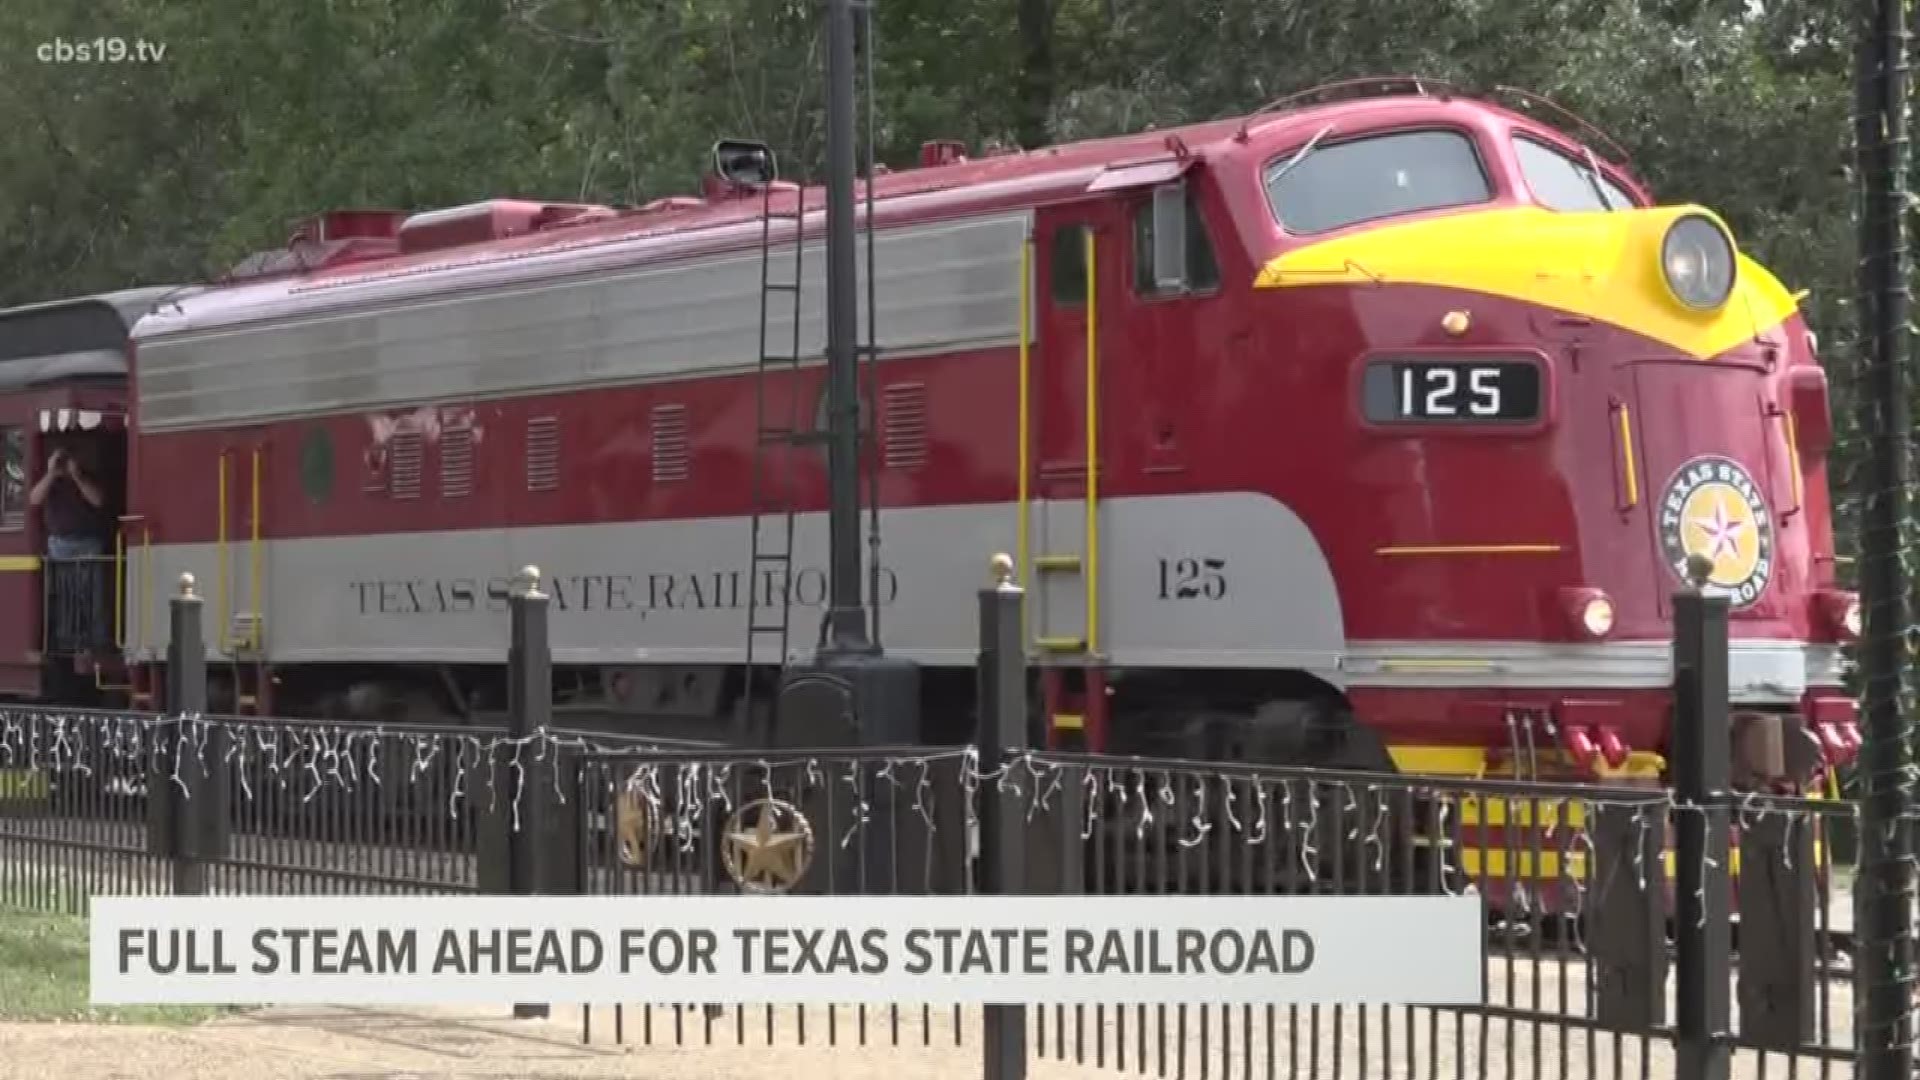 Ahead of Fourth of July celebrations the Texas State Railroad will be once again ride the railways after being closed amid COVID-19.